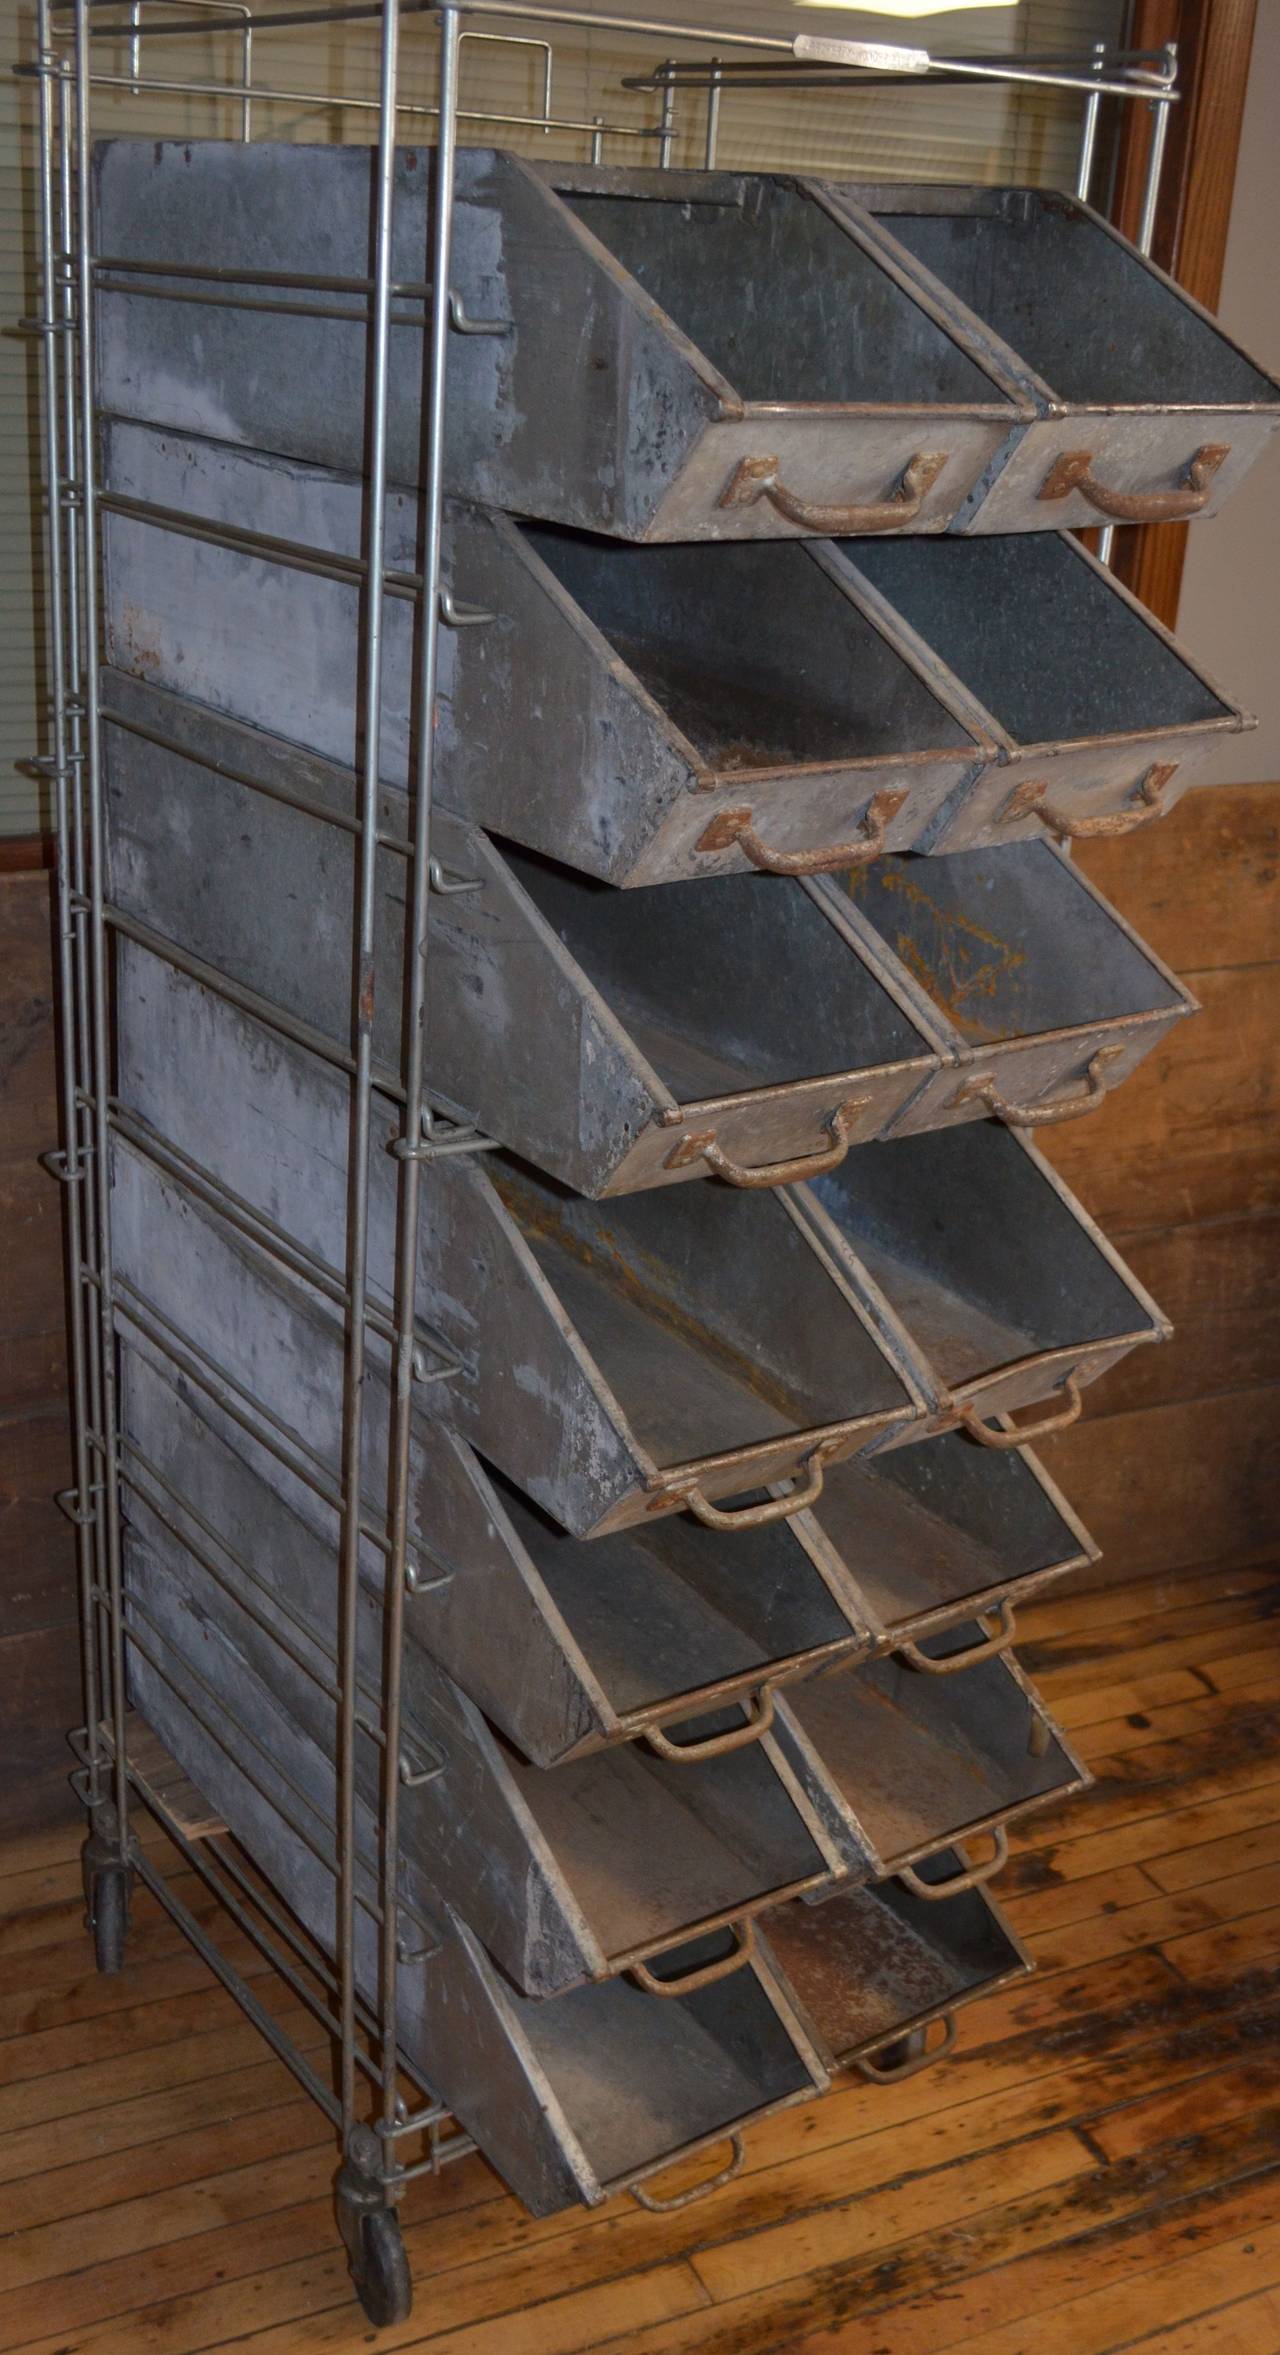 Industrial bakery rack with 14 slide-out bins from Wonder Bread Bakery. That's the bread us baby boomers grew up on slathered with peanut butter and jelly. This steel rack is mounted on pivoting wheels for easy mobility. Each of the 14 galvanized